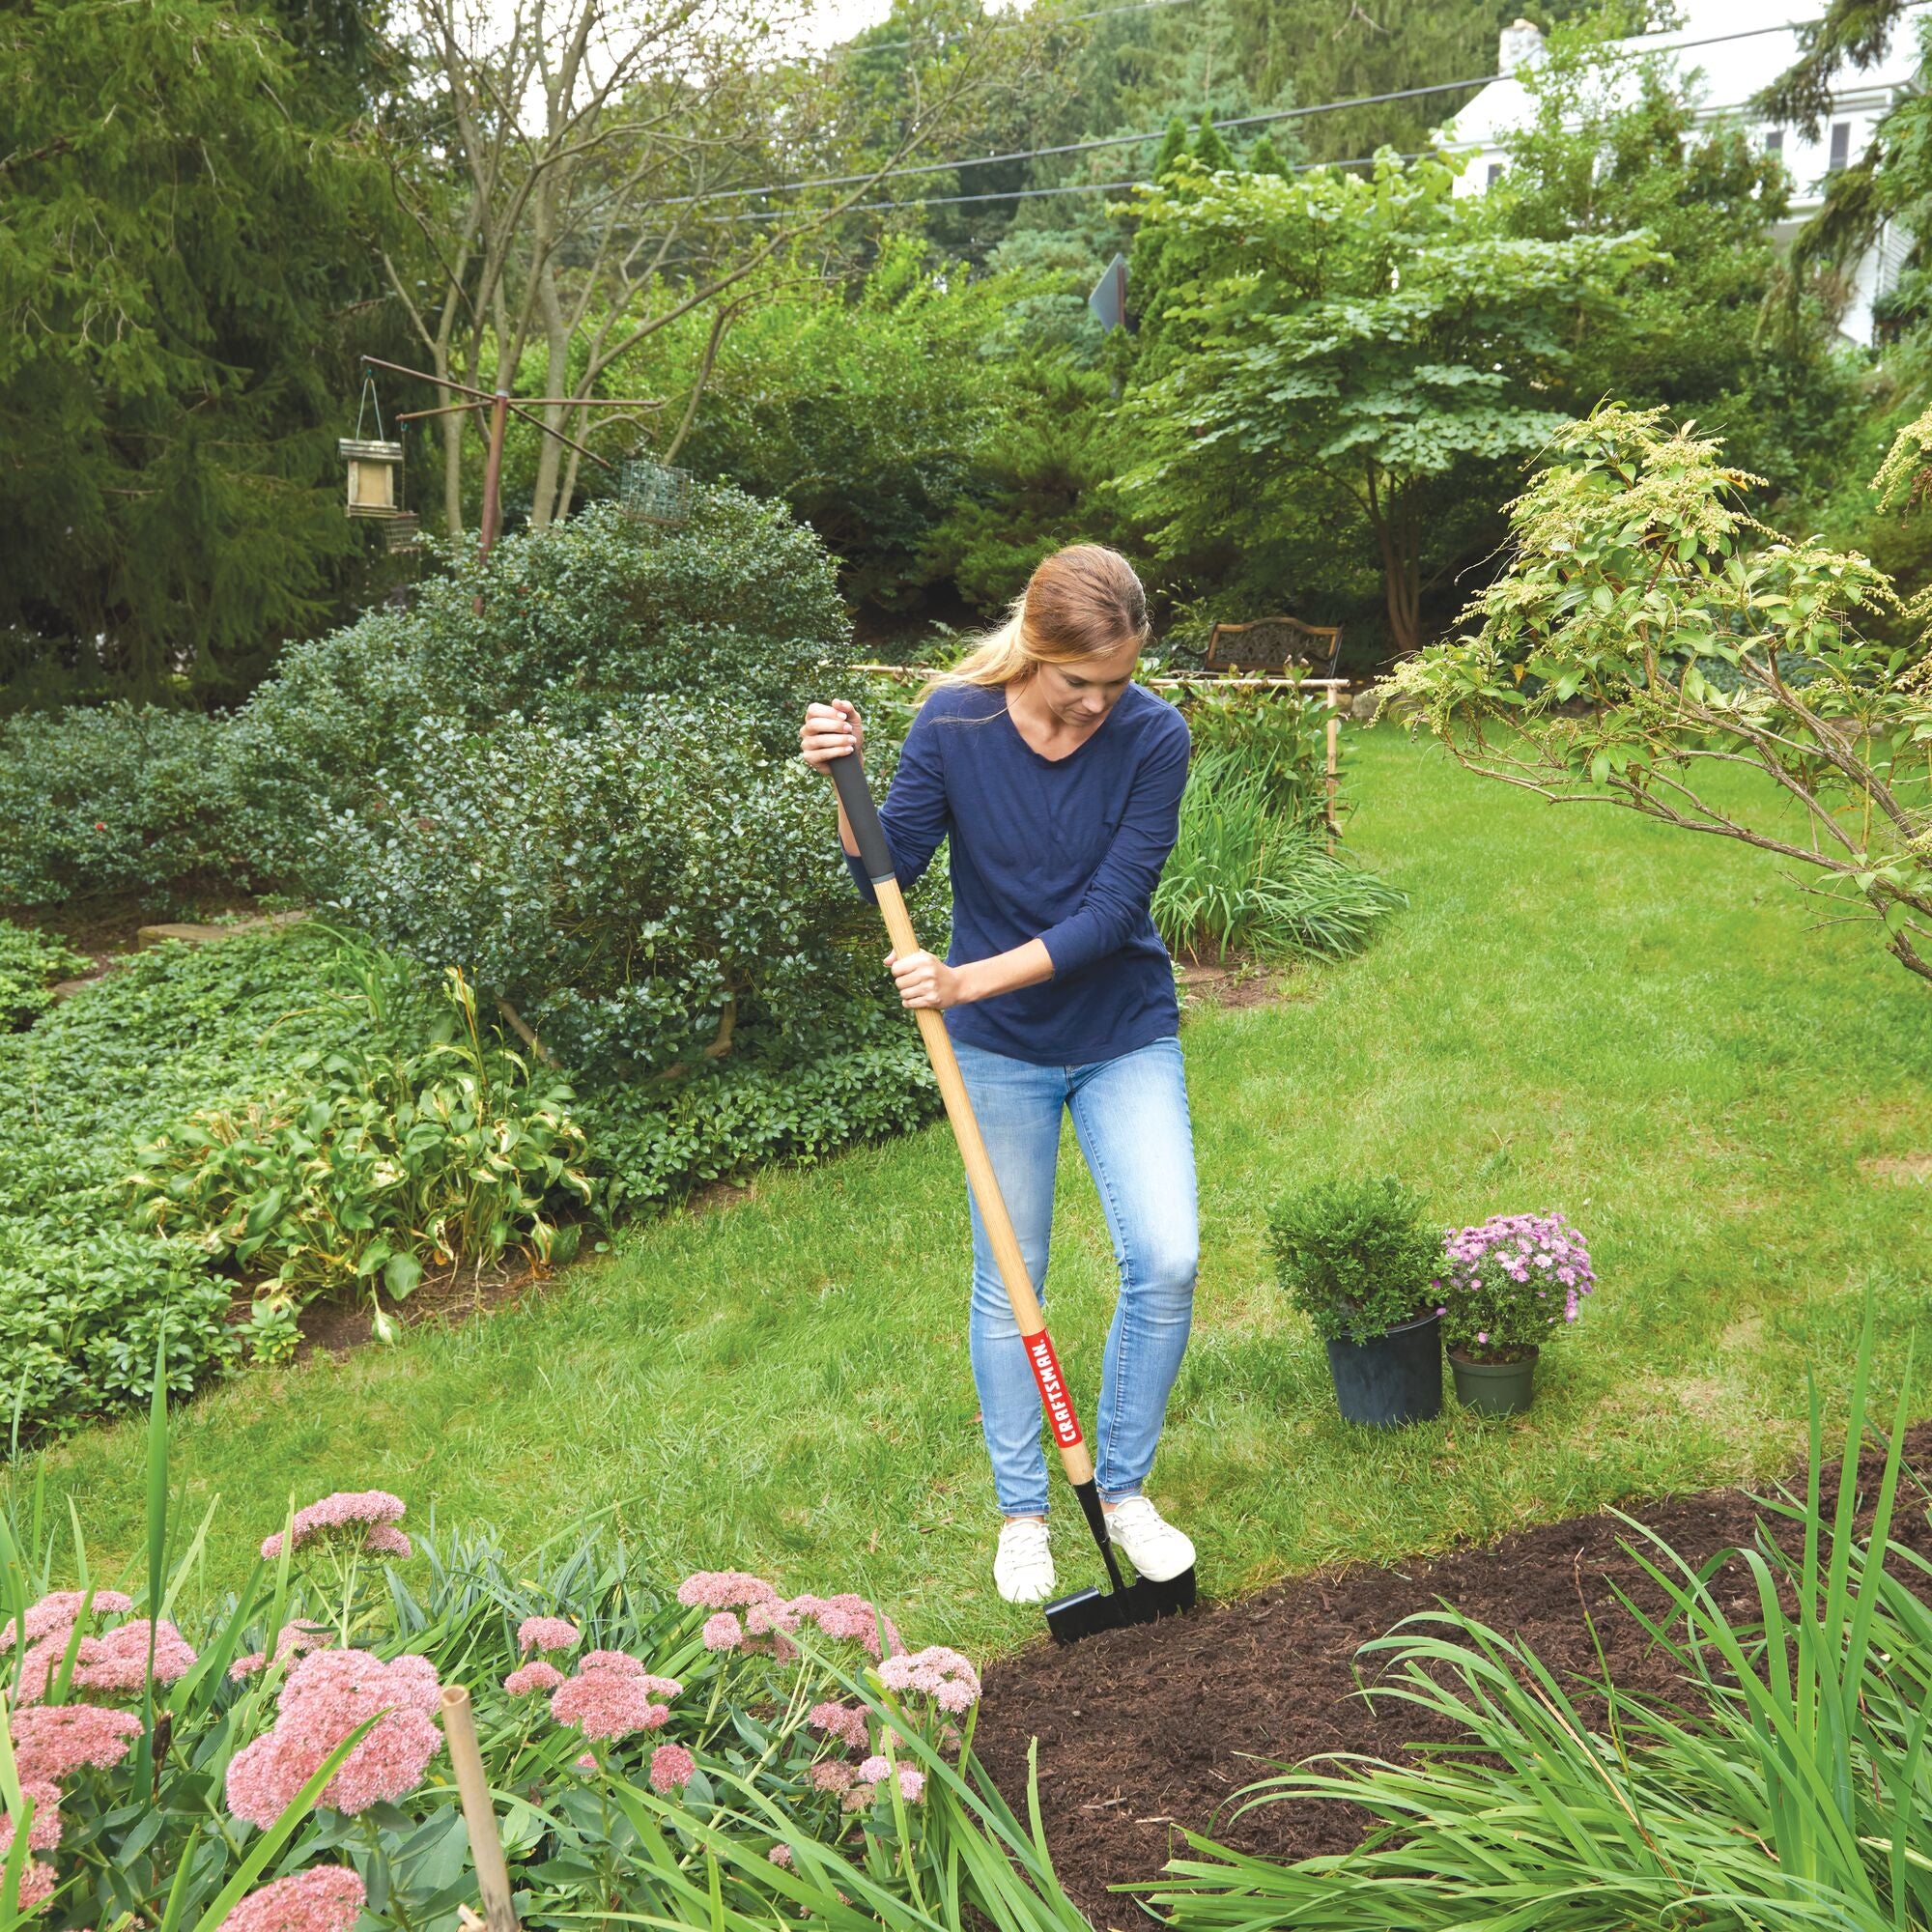 Wood handle turf edger being used by a person.